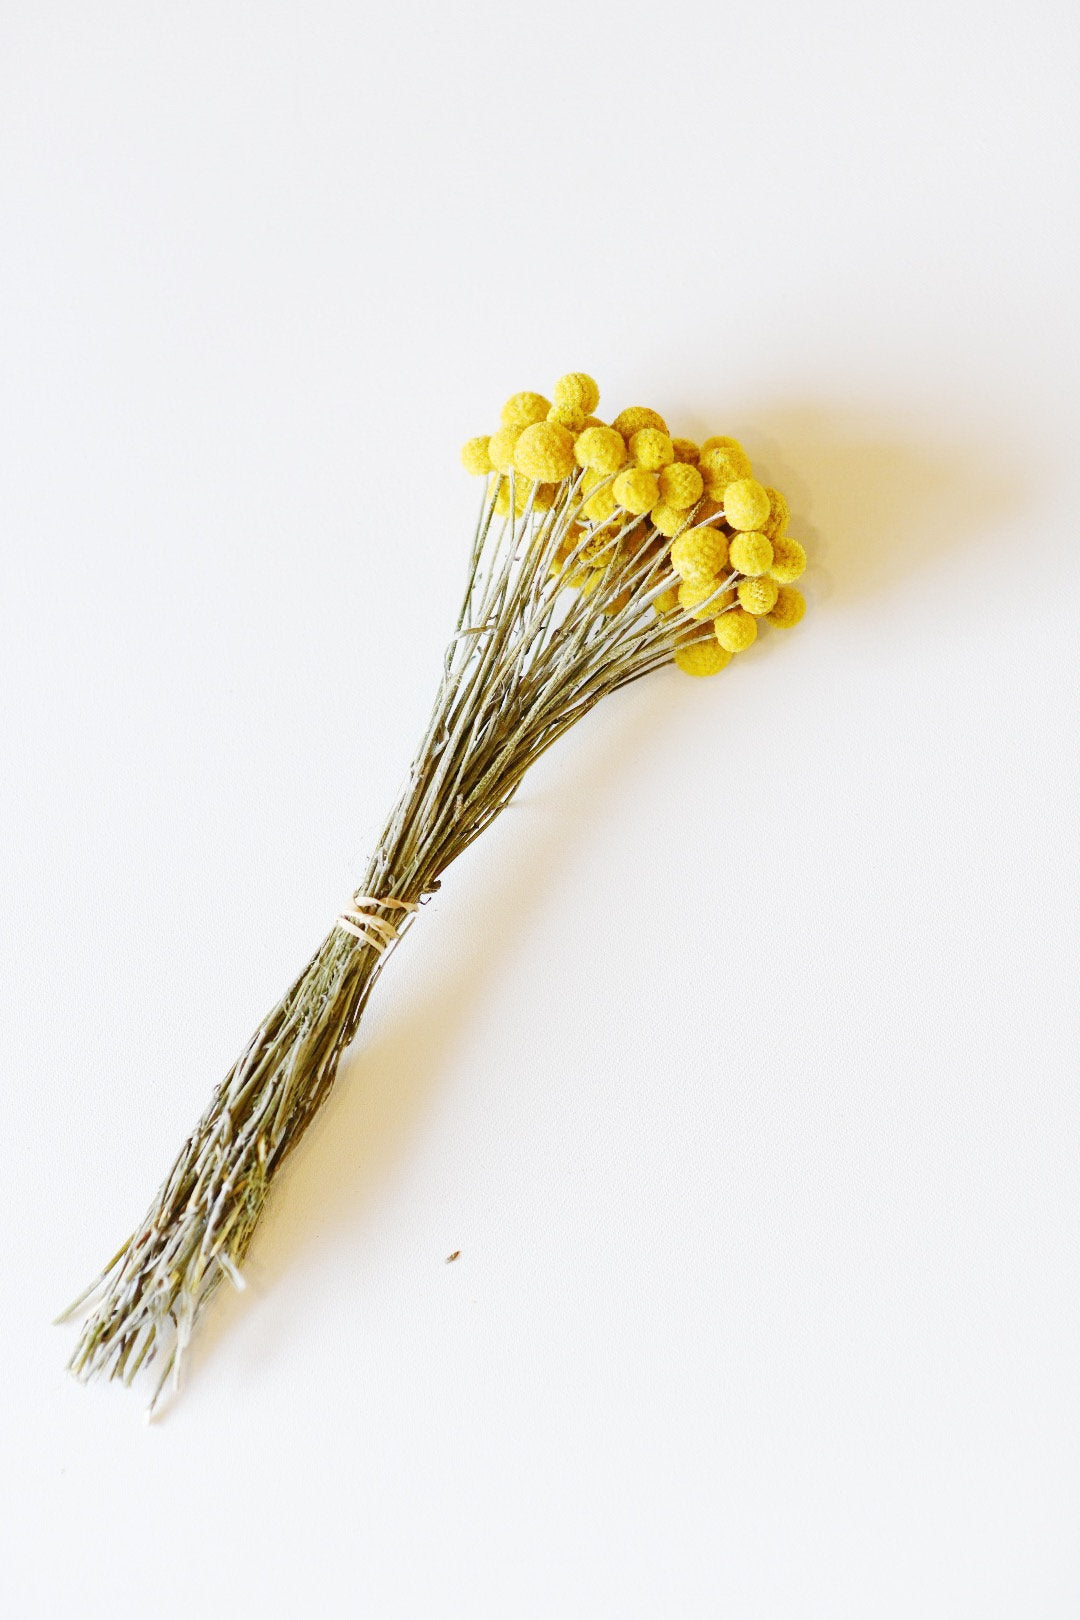 Dried Billy Balls, Craspedia Bunch, Drumstick Flower, Yellow Flowers, Dry Floral, Wedding Bouquet, Modern, Country Rustic Floral Arrangement